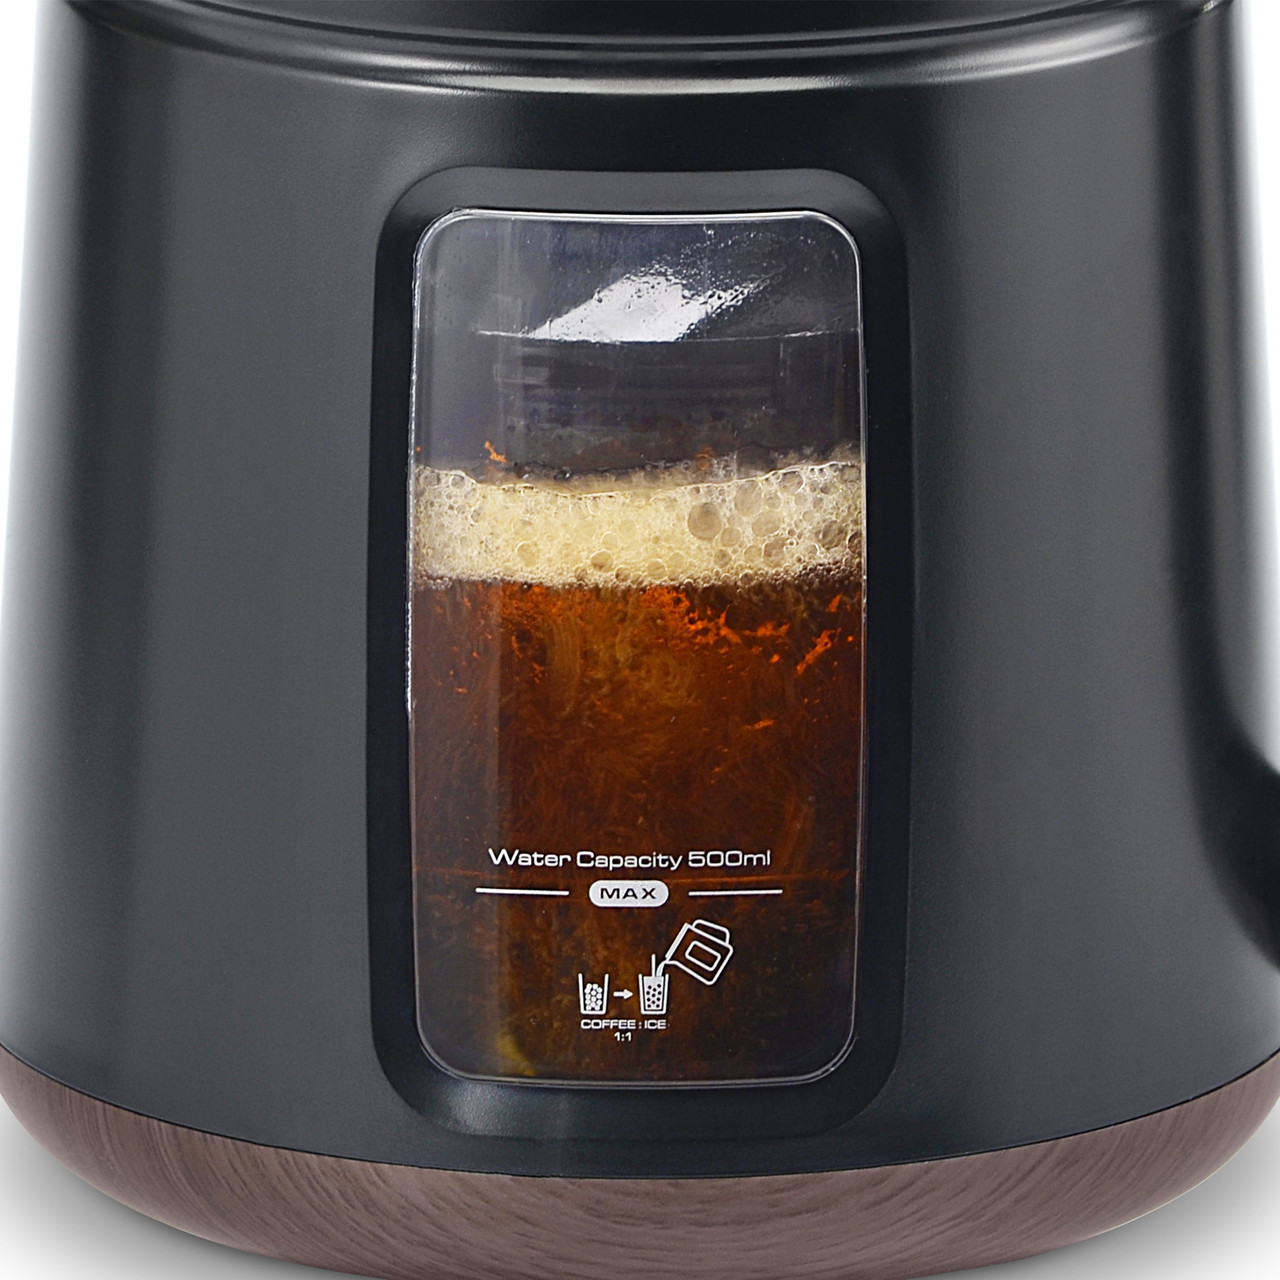 What Are Rapid Cold Brew Machines And Do They Actually Work?